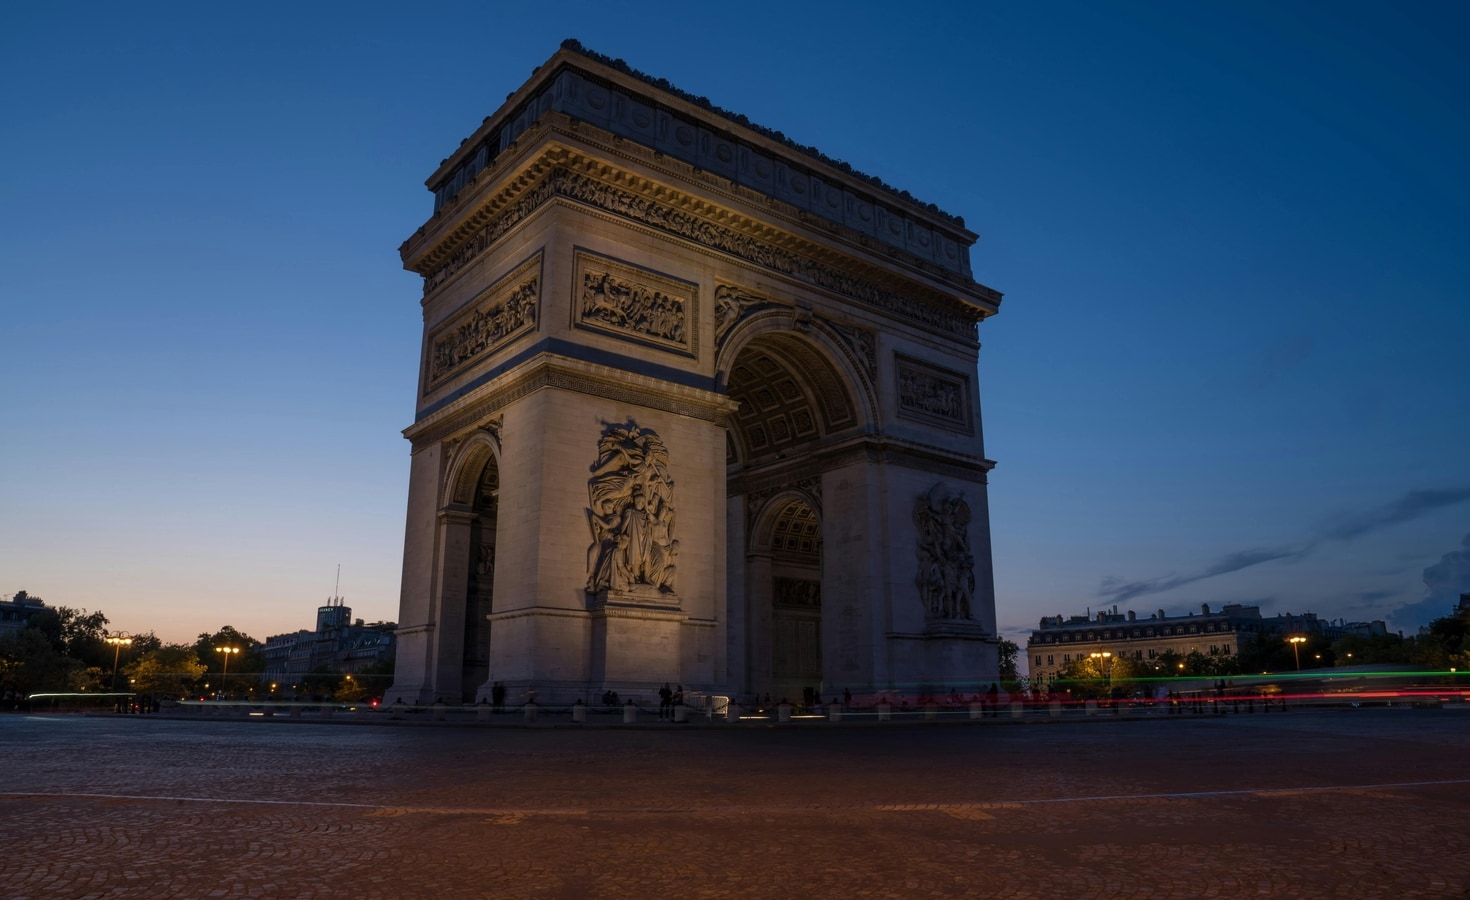 Champs-Elysees gets a makeover to lure tourists back